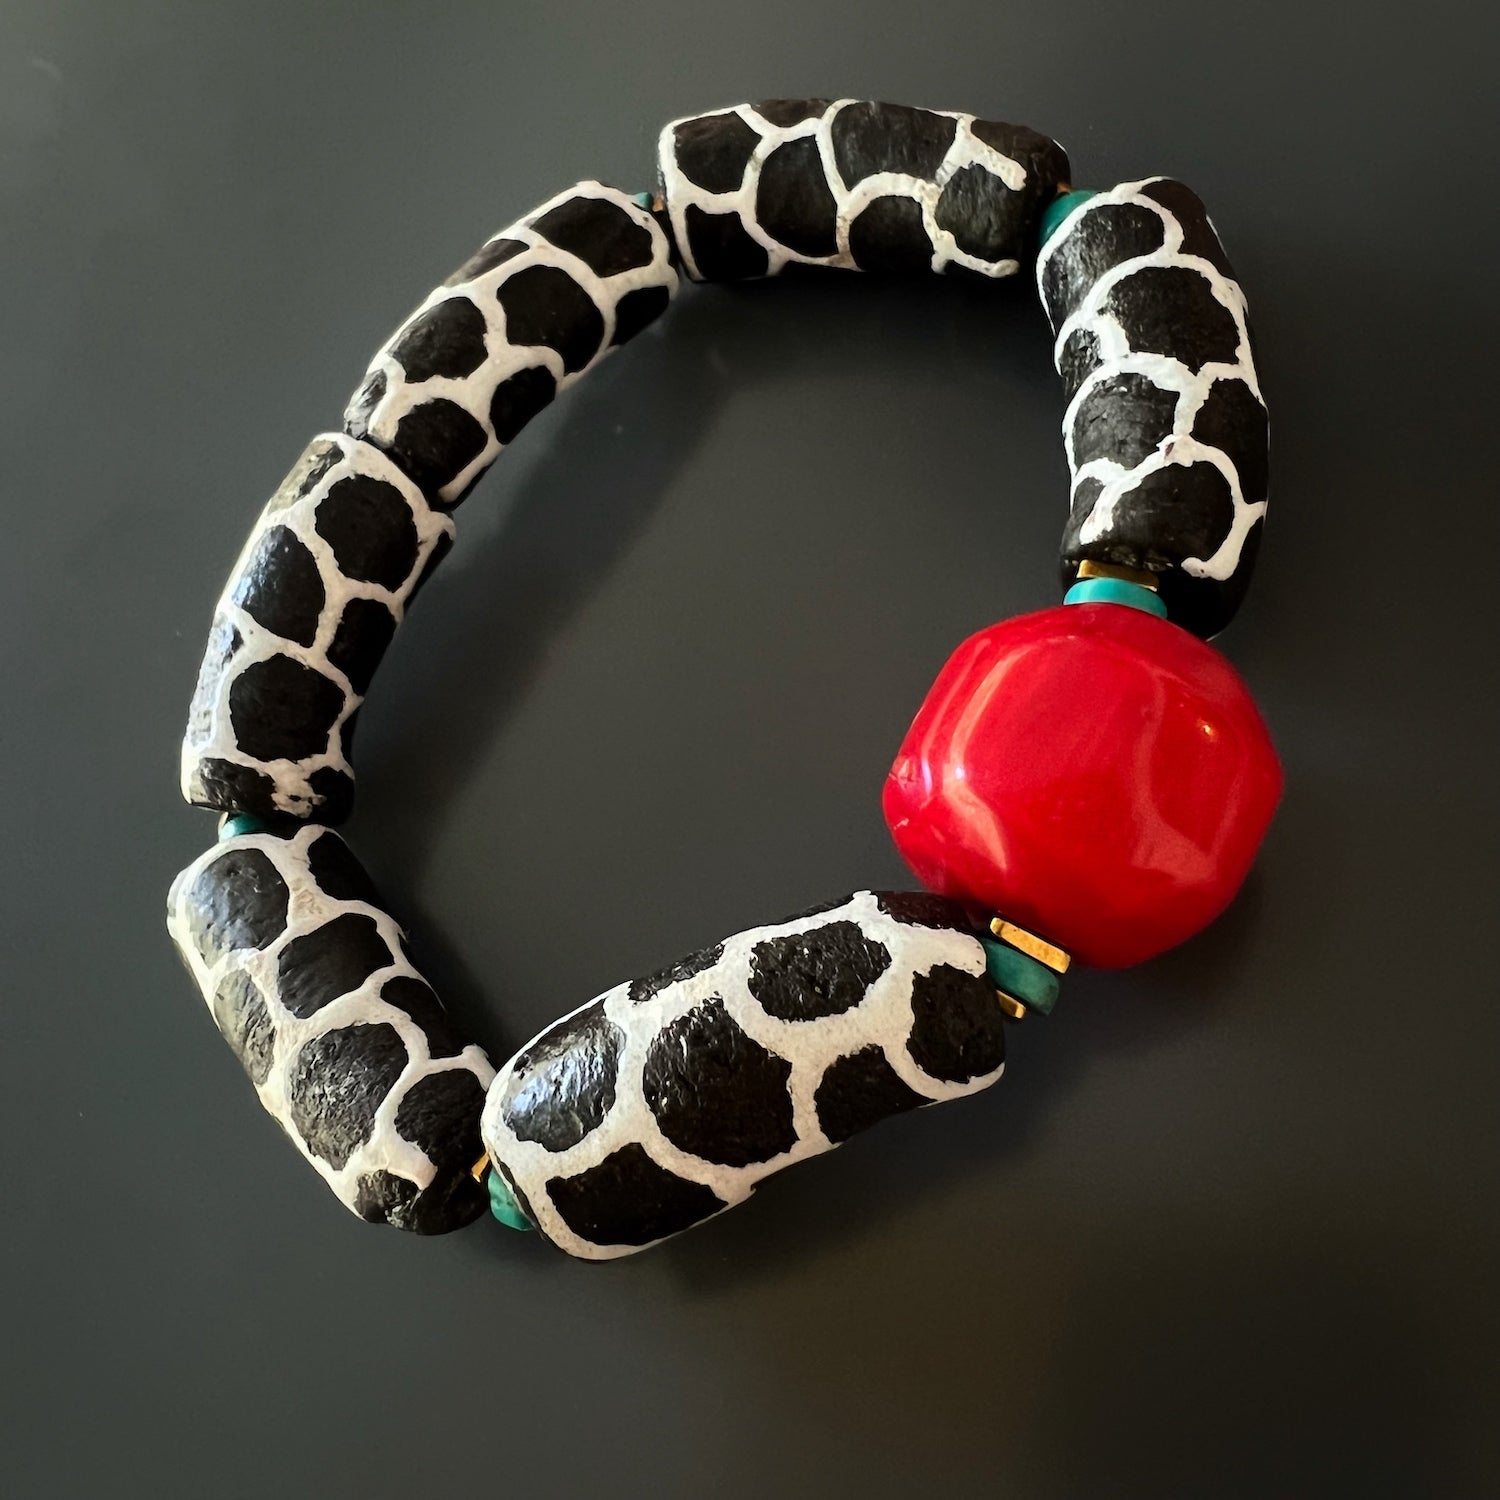 Vibrant red coral bead, the centerpiece of the African Zebra Red Bracelet, symbolizing energy and protection.